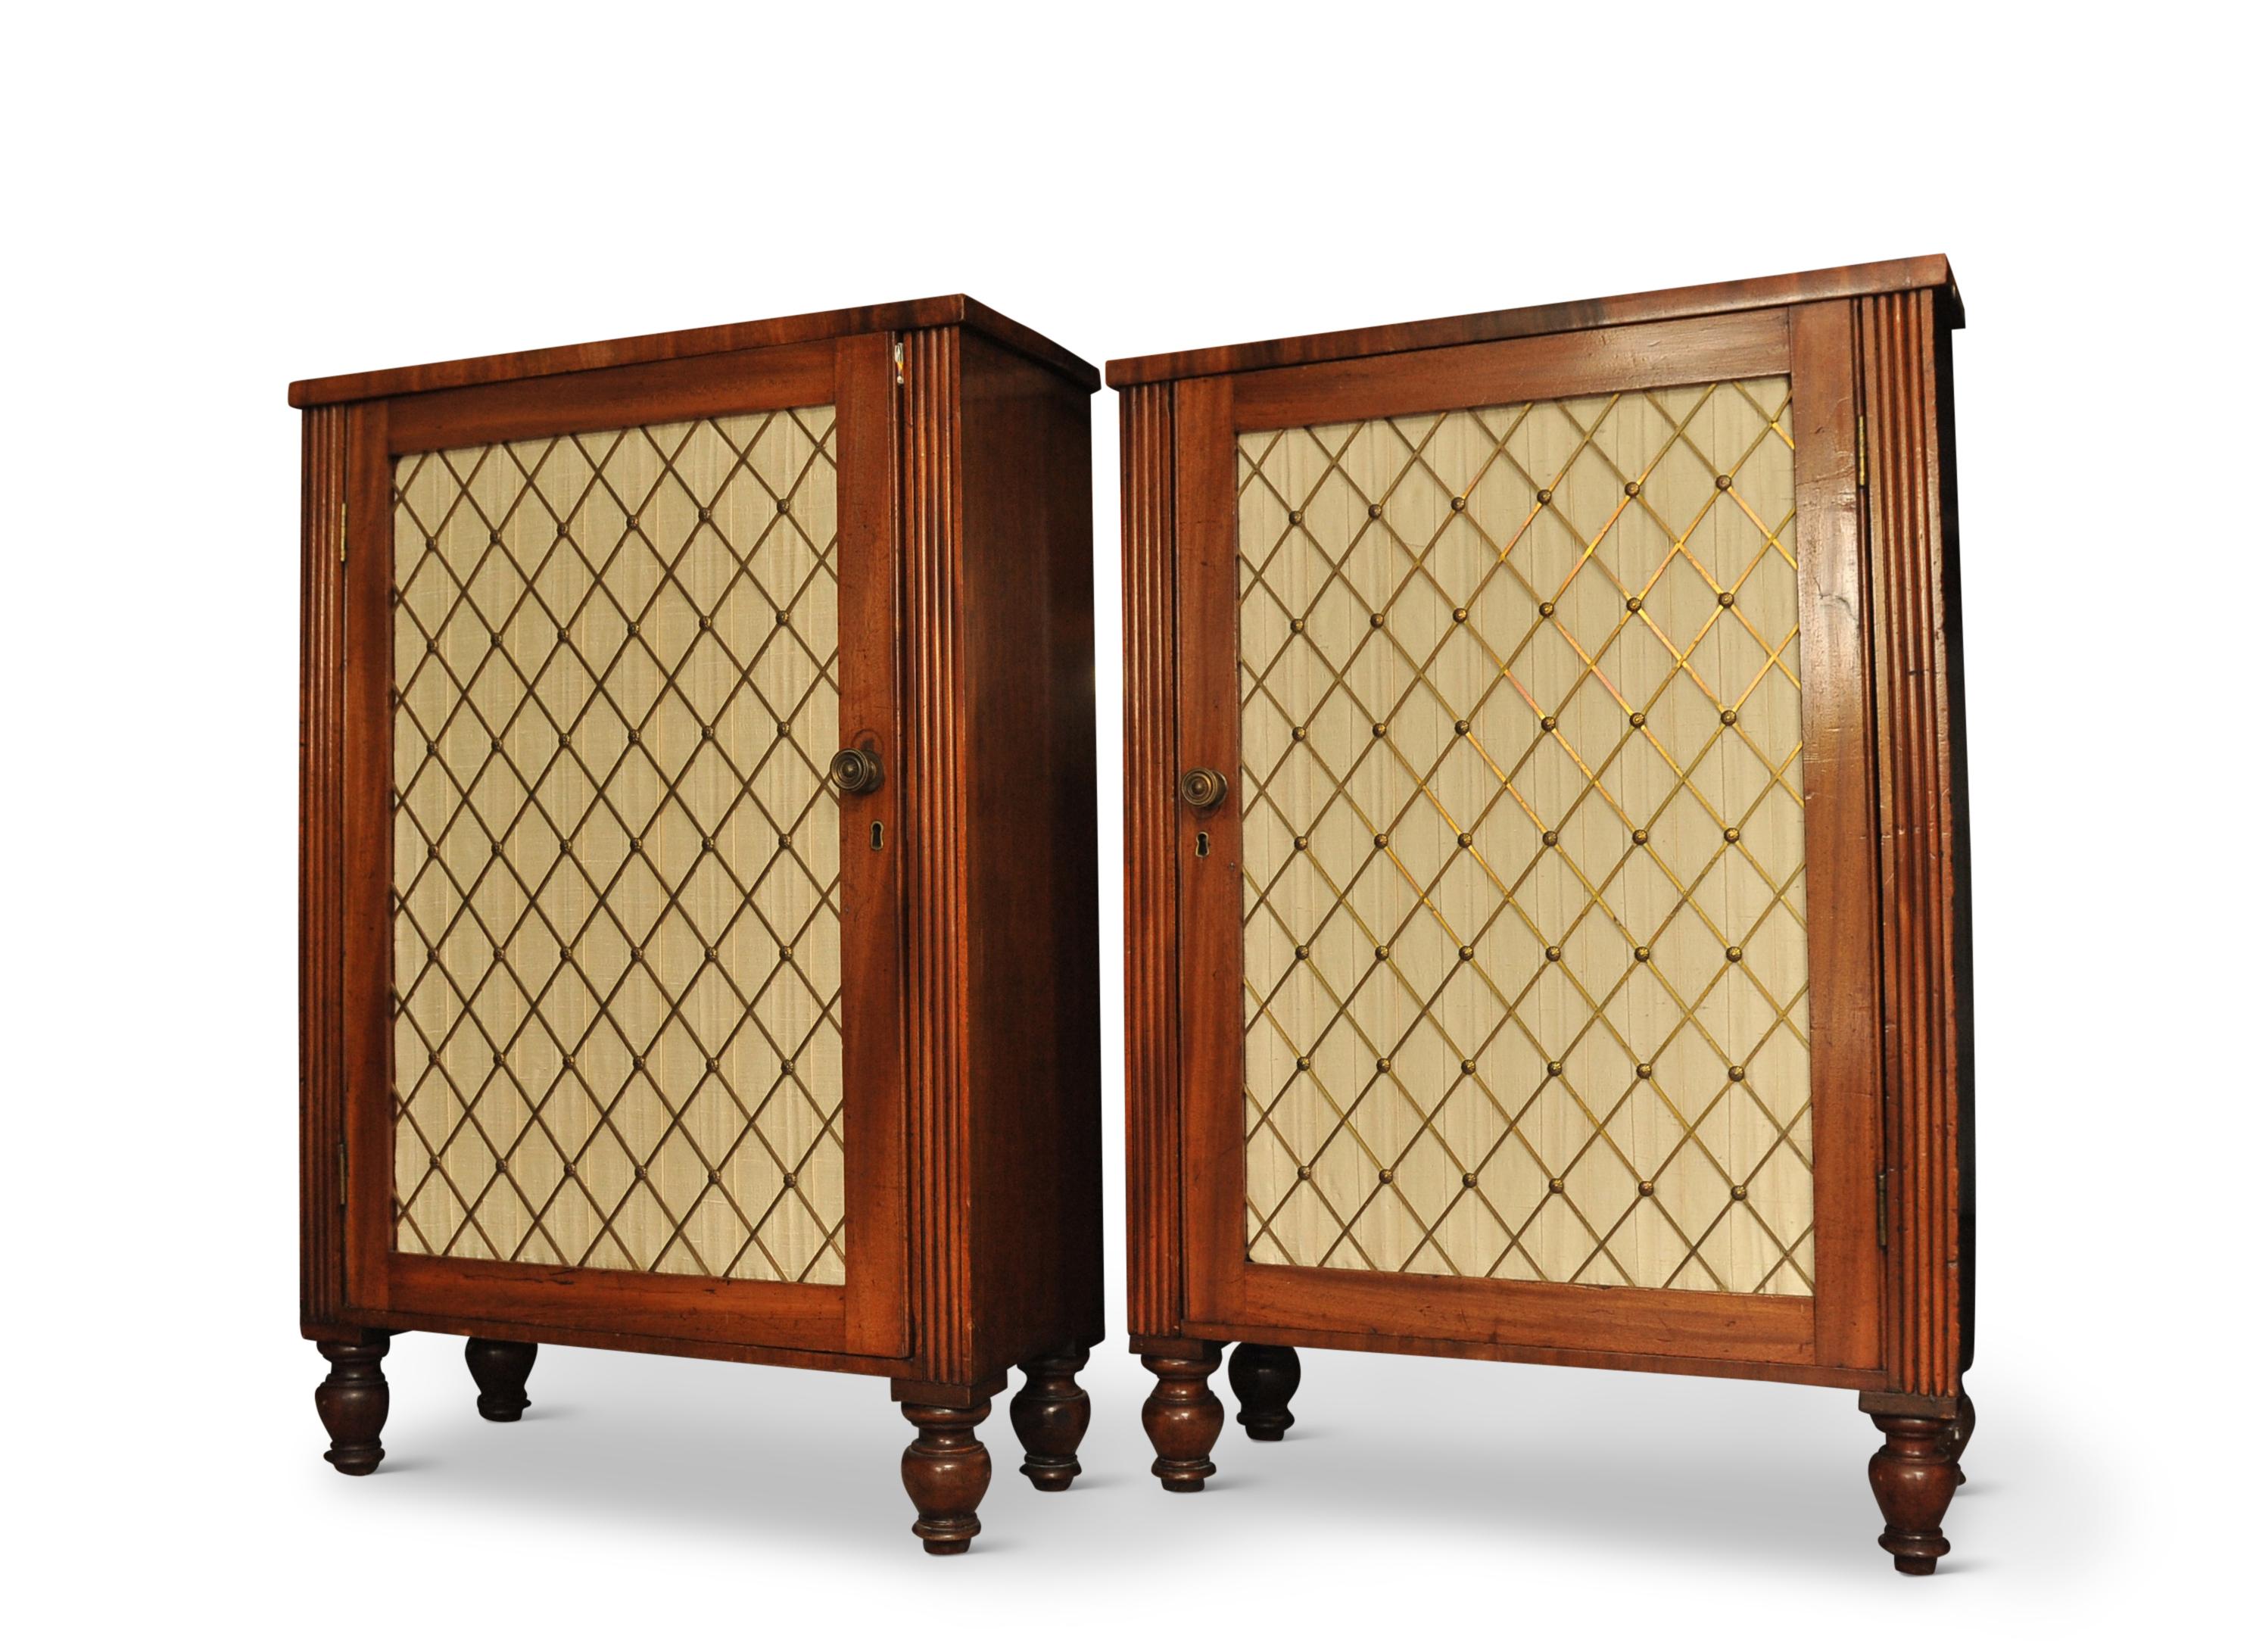 Woodwork Rare Pair of Regency Period Mahogany Side Cabinets with Brass Lattice Fronts For Sale